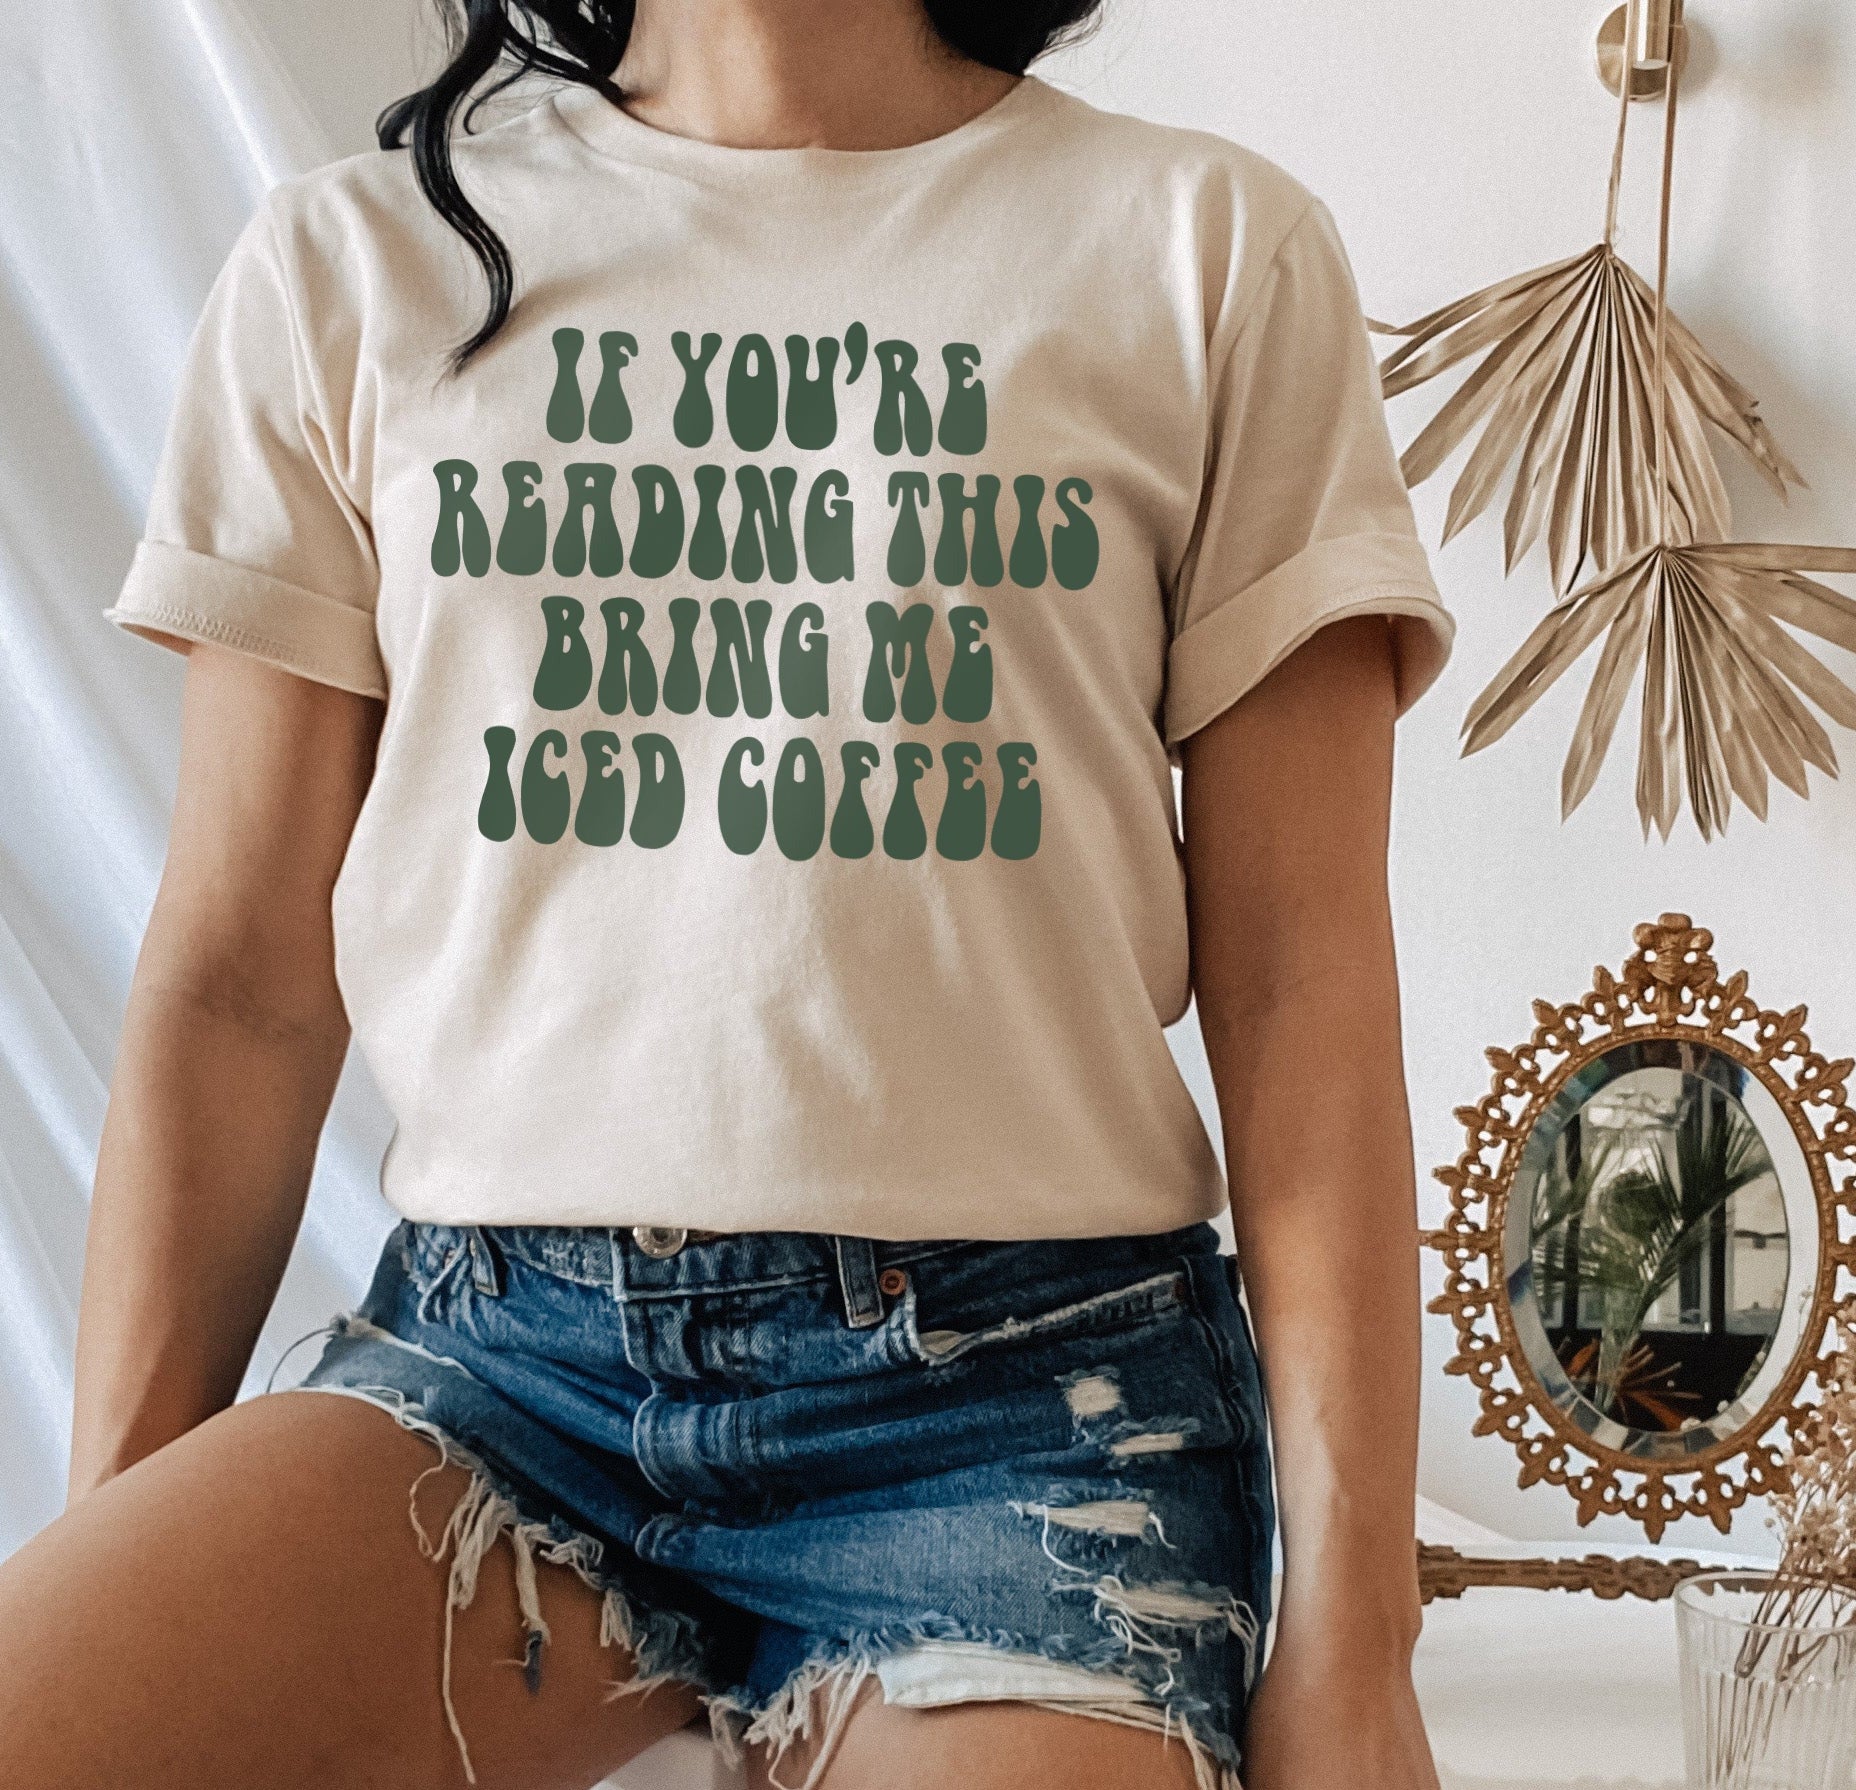 tan shirt that says If You're Reading This Bring Me Iced Coffee - HighCiti